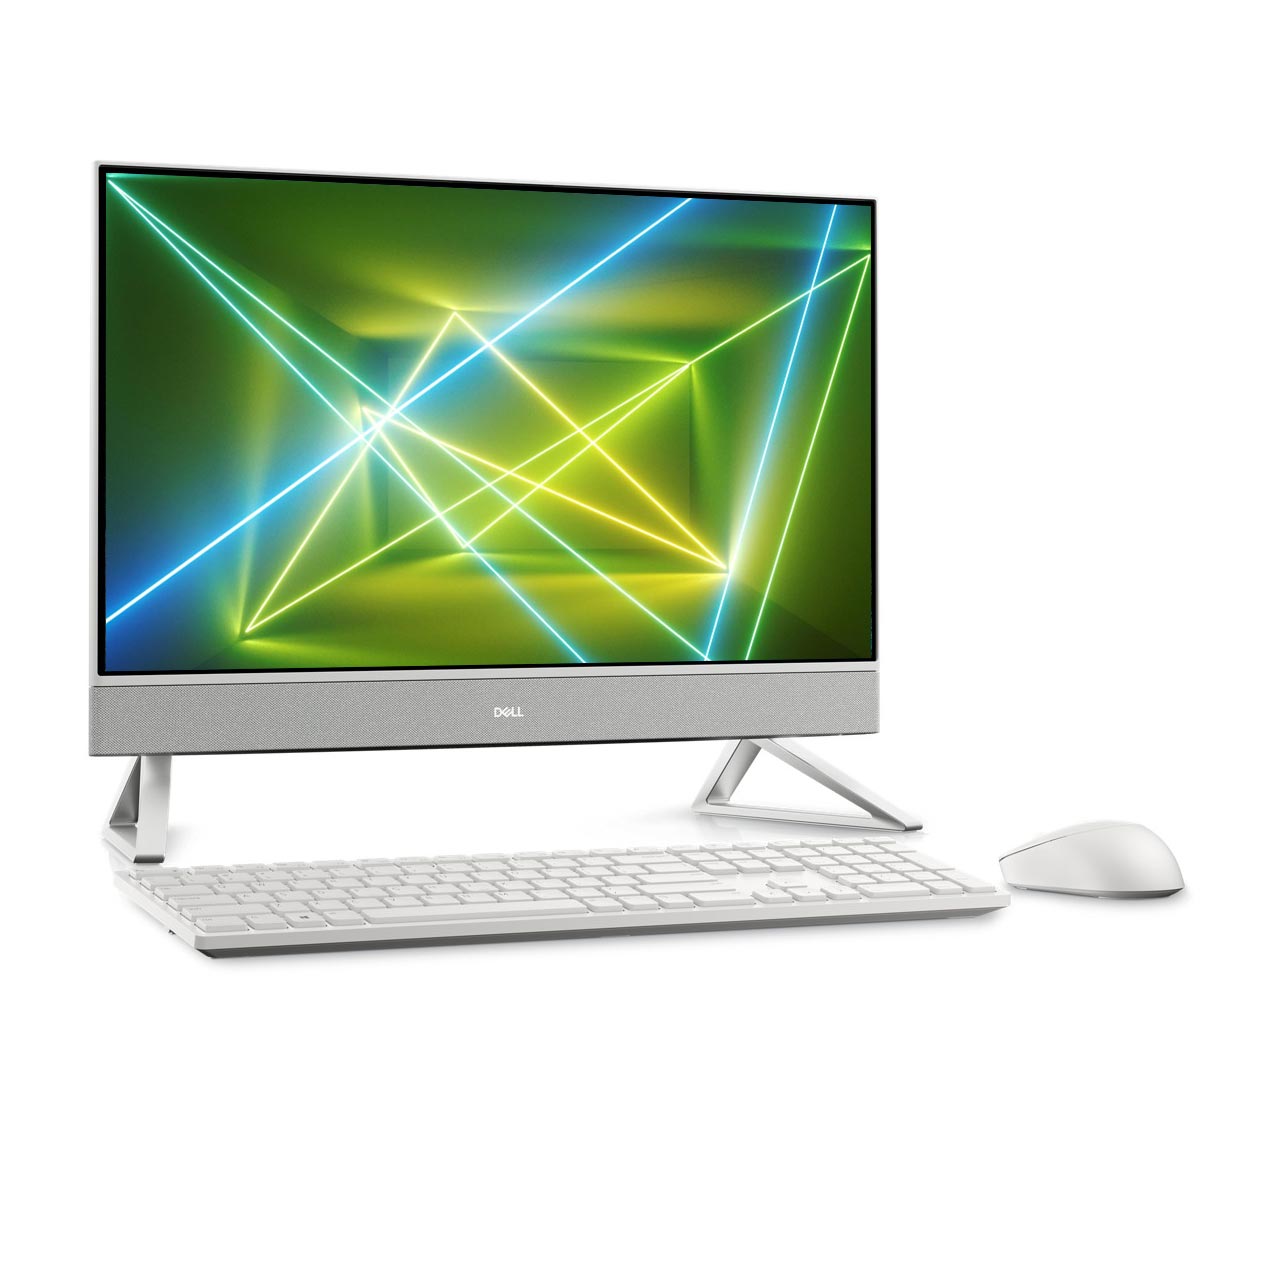 Inspiron 24 5000 (5420) All-in-One